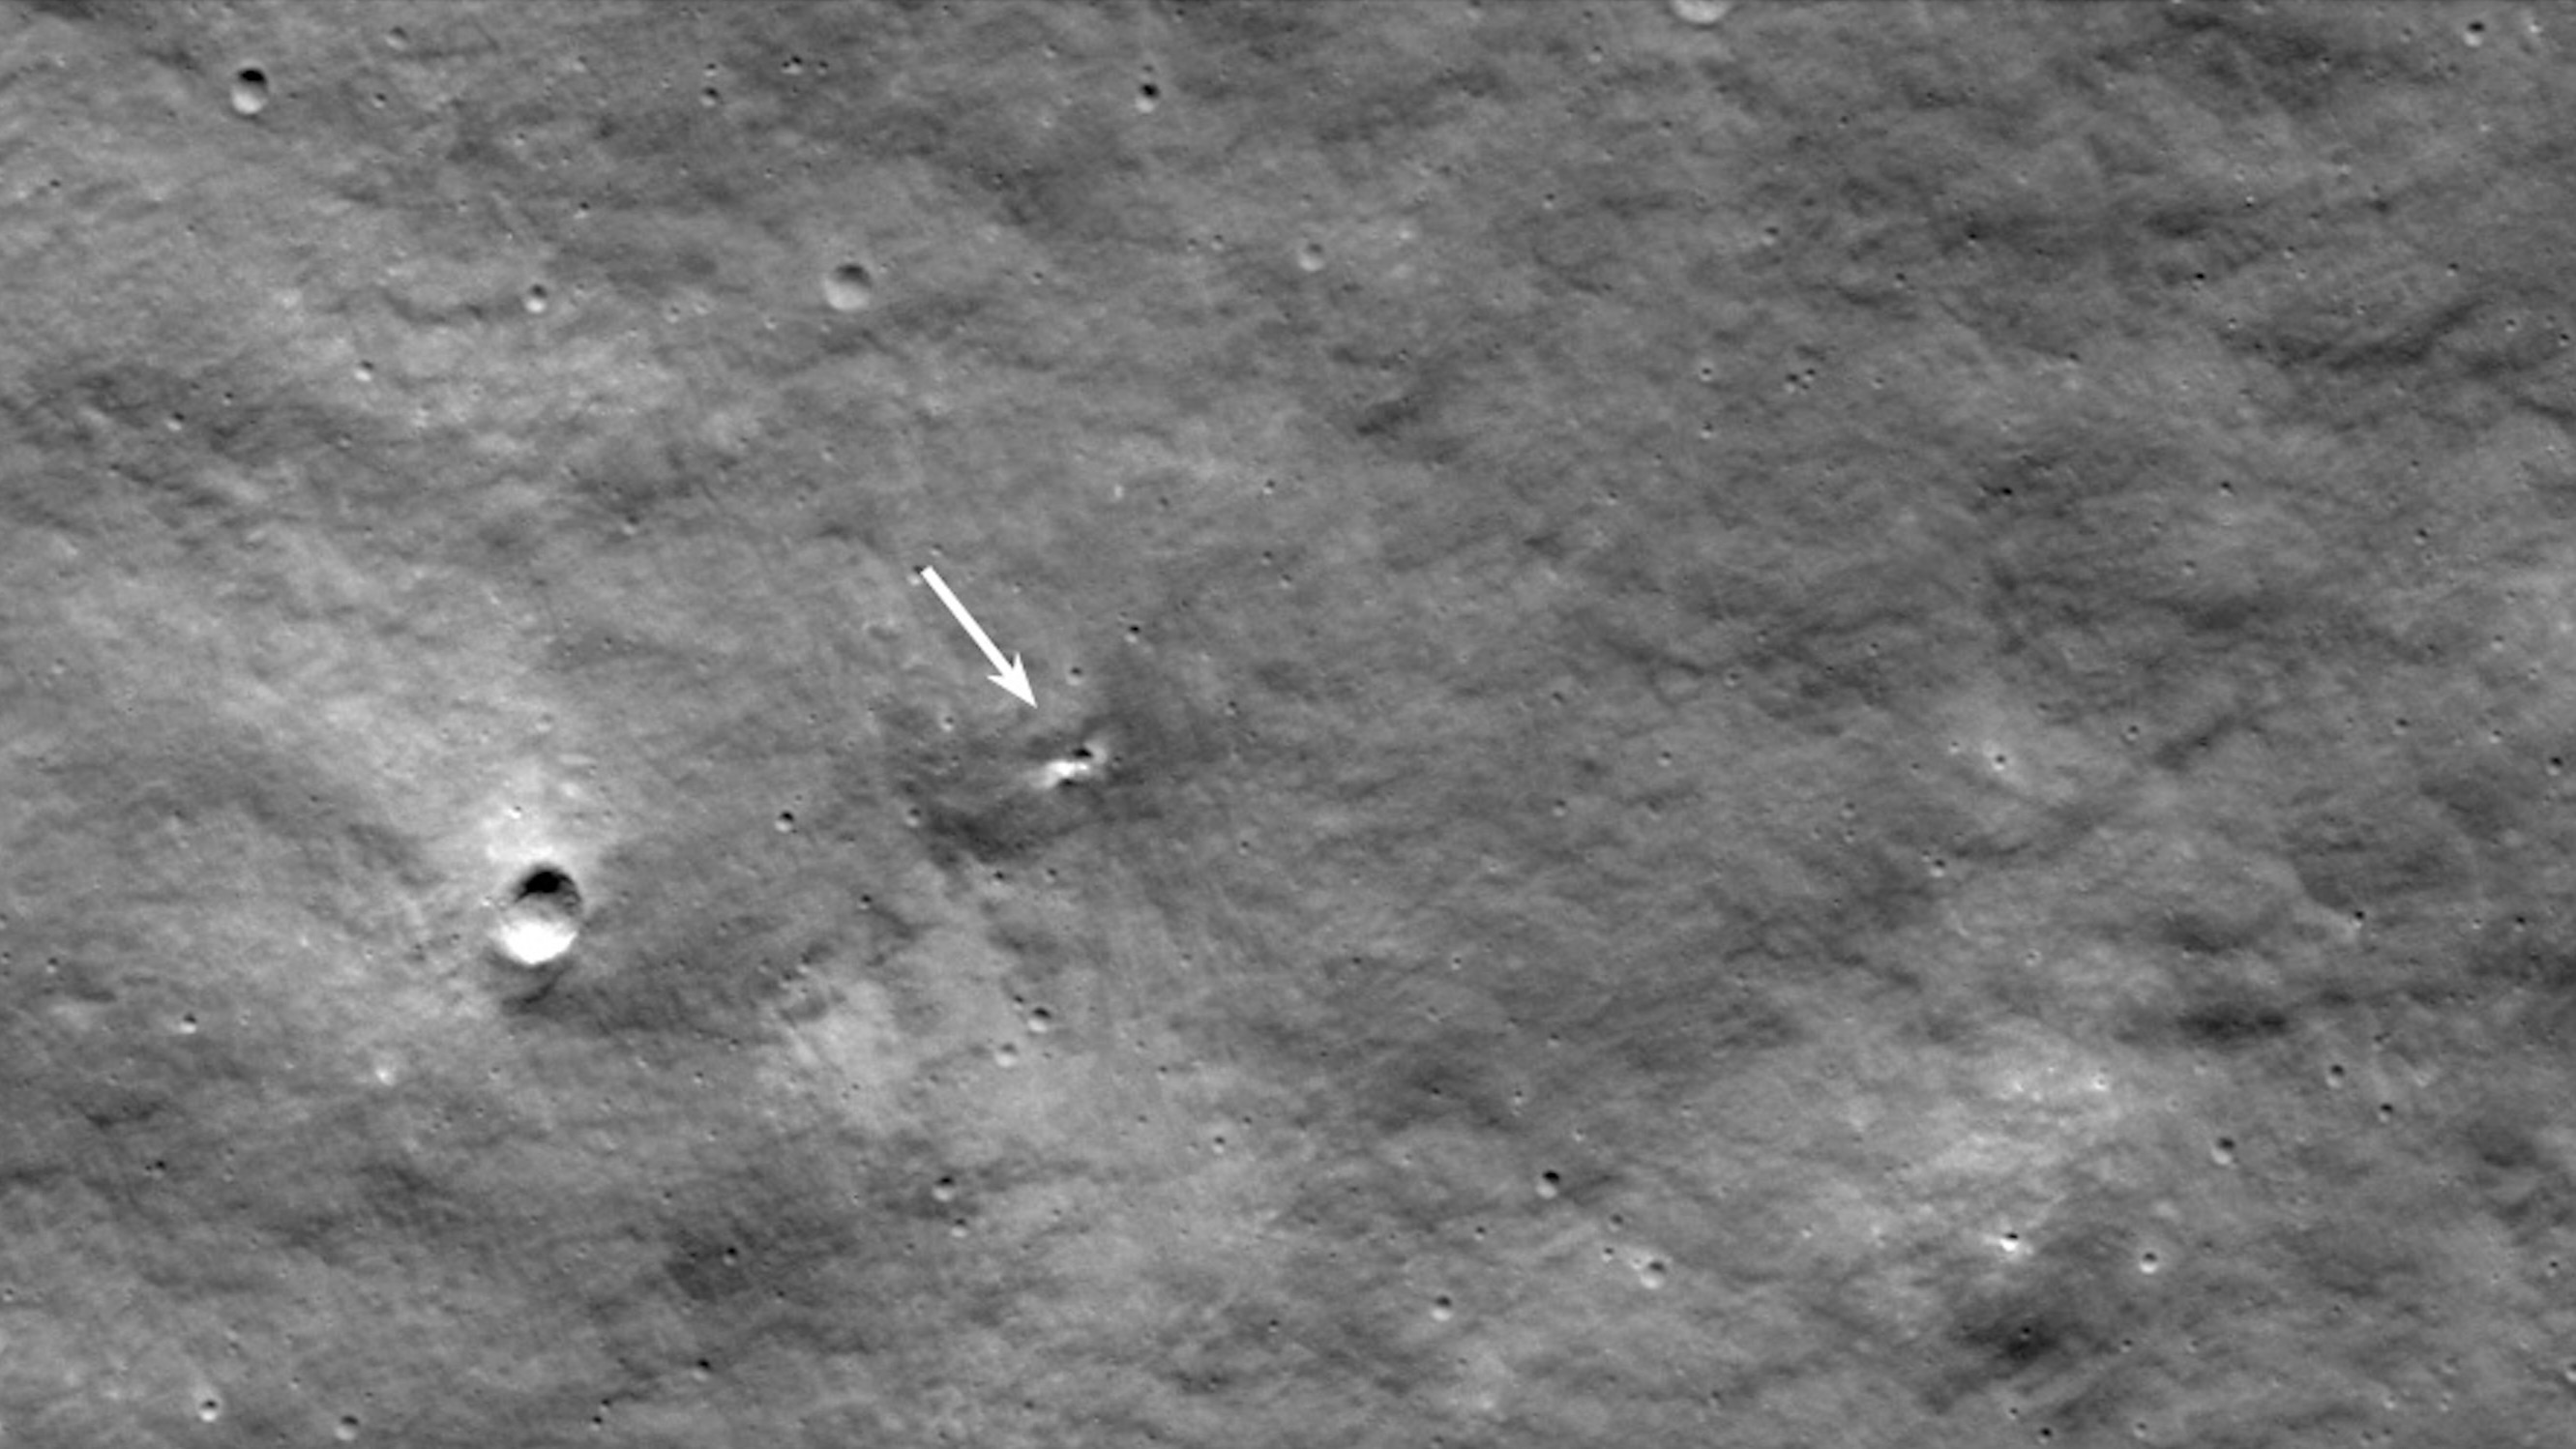 A small crater on the gray surface of the moon